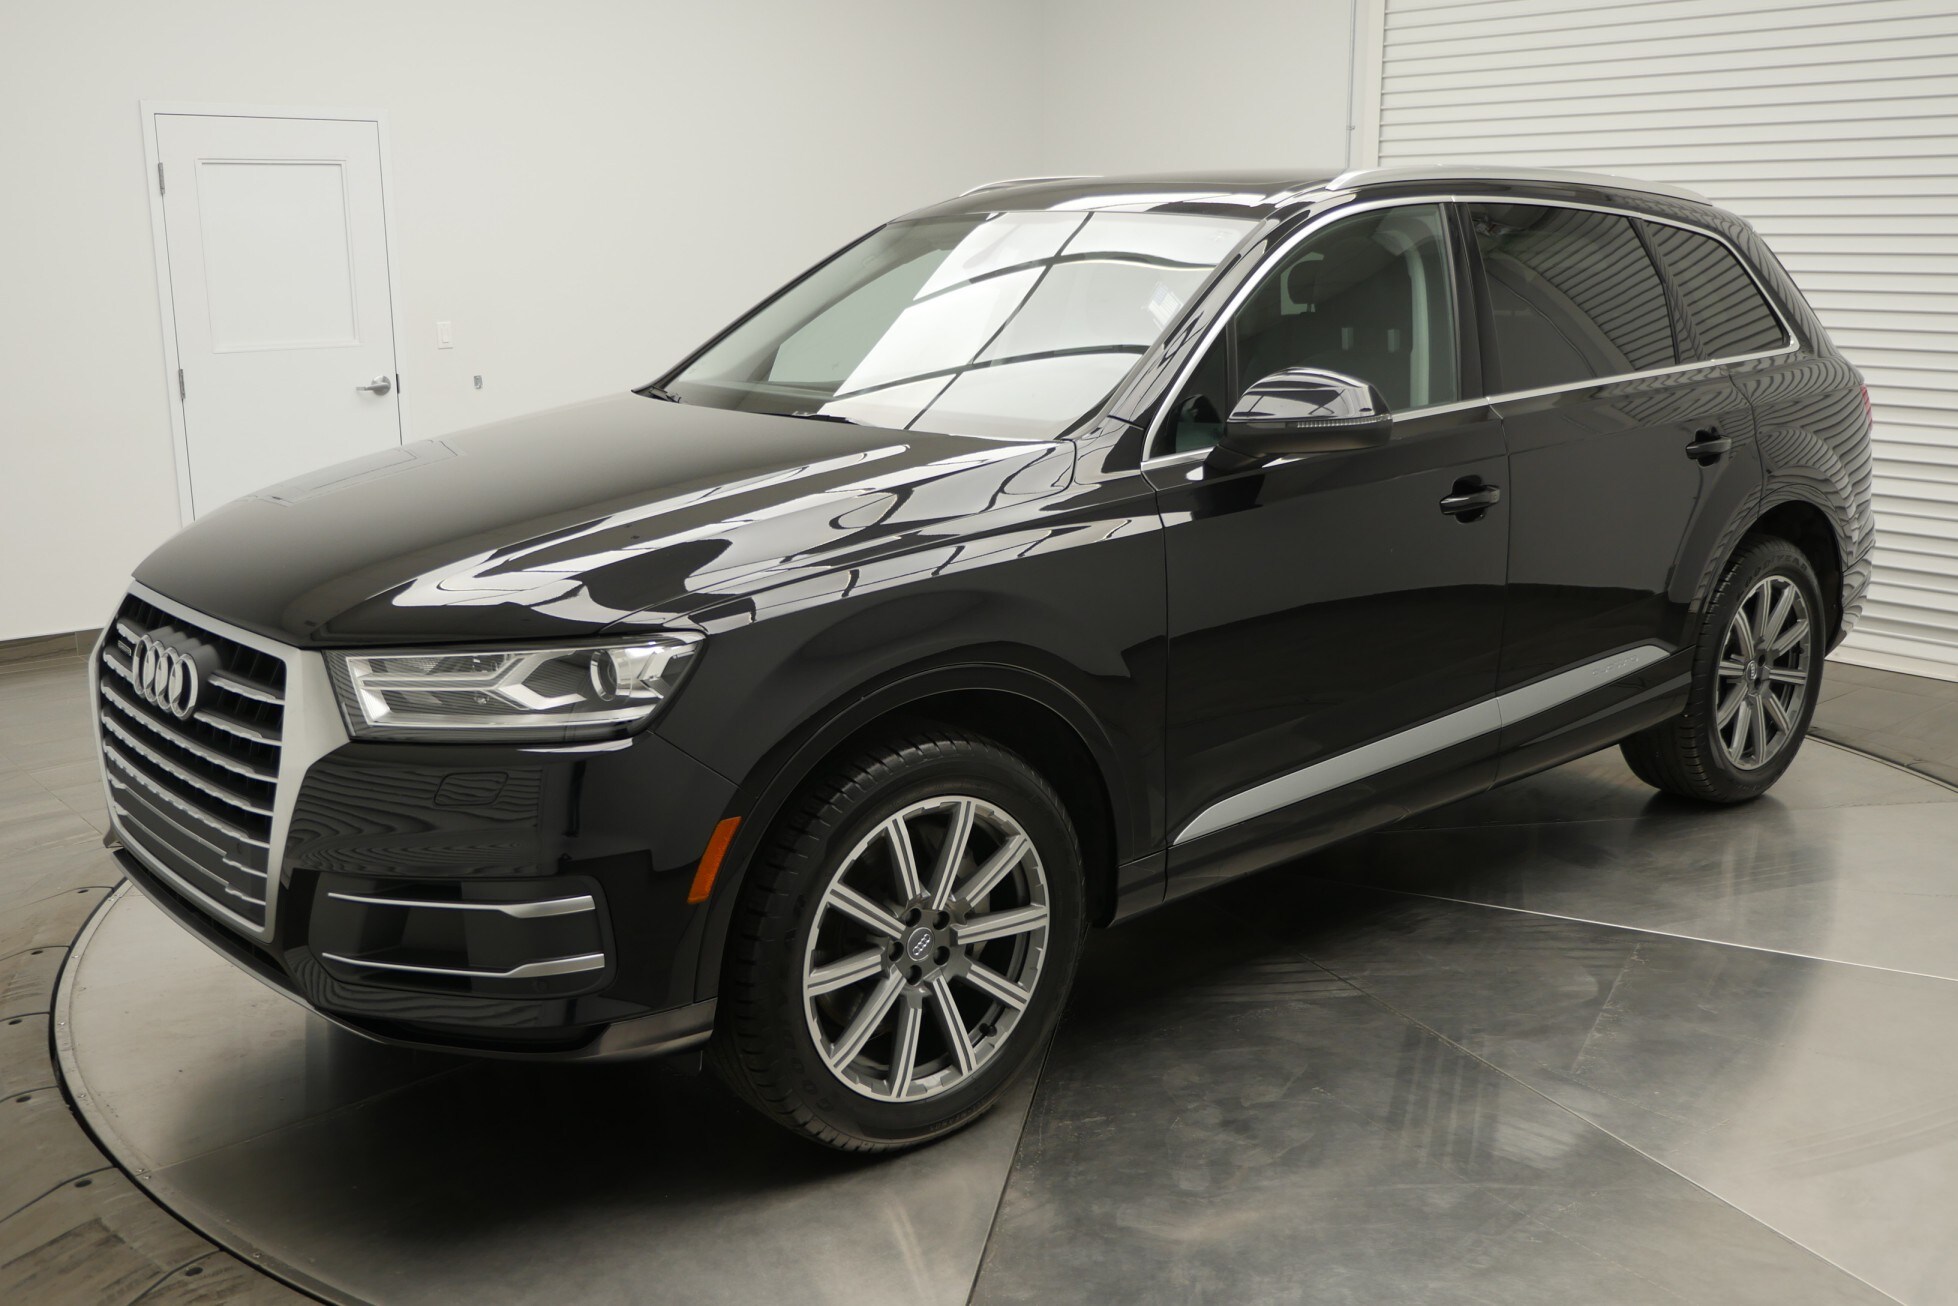 previously sold used SUV Audi Q7 Komfort 2018